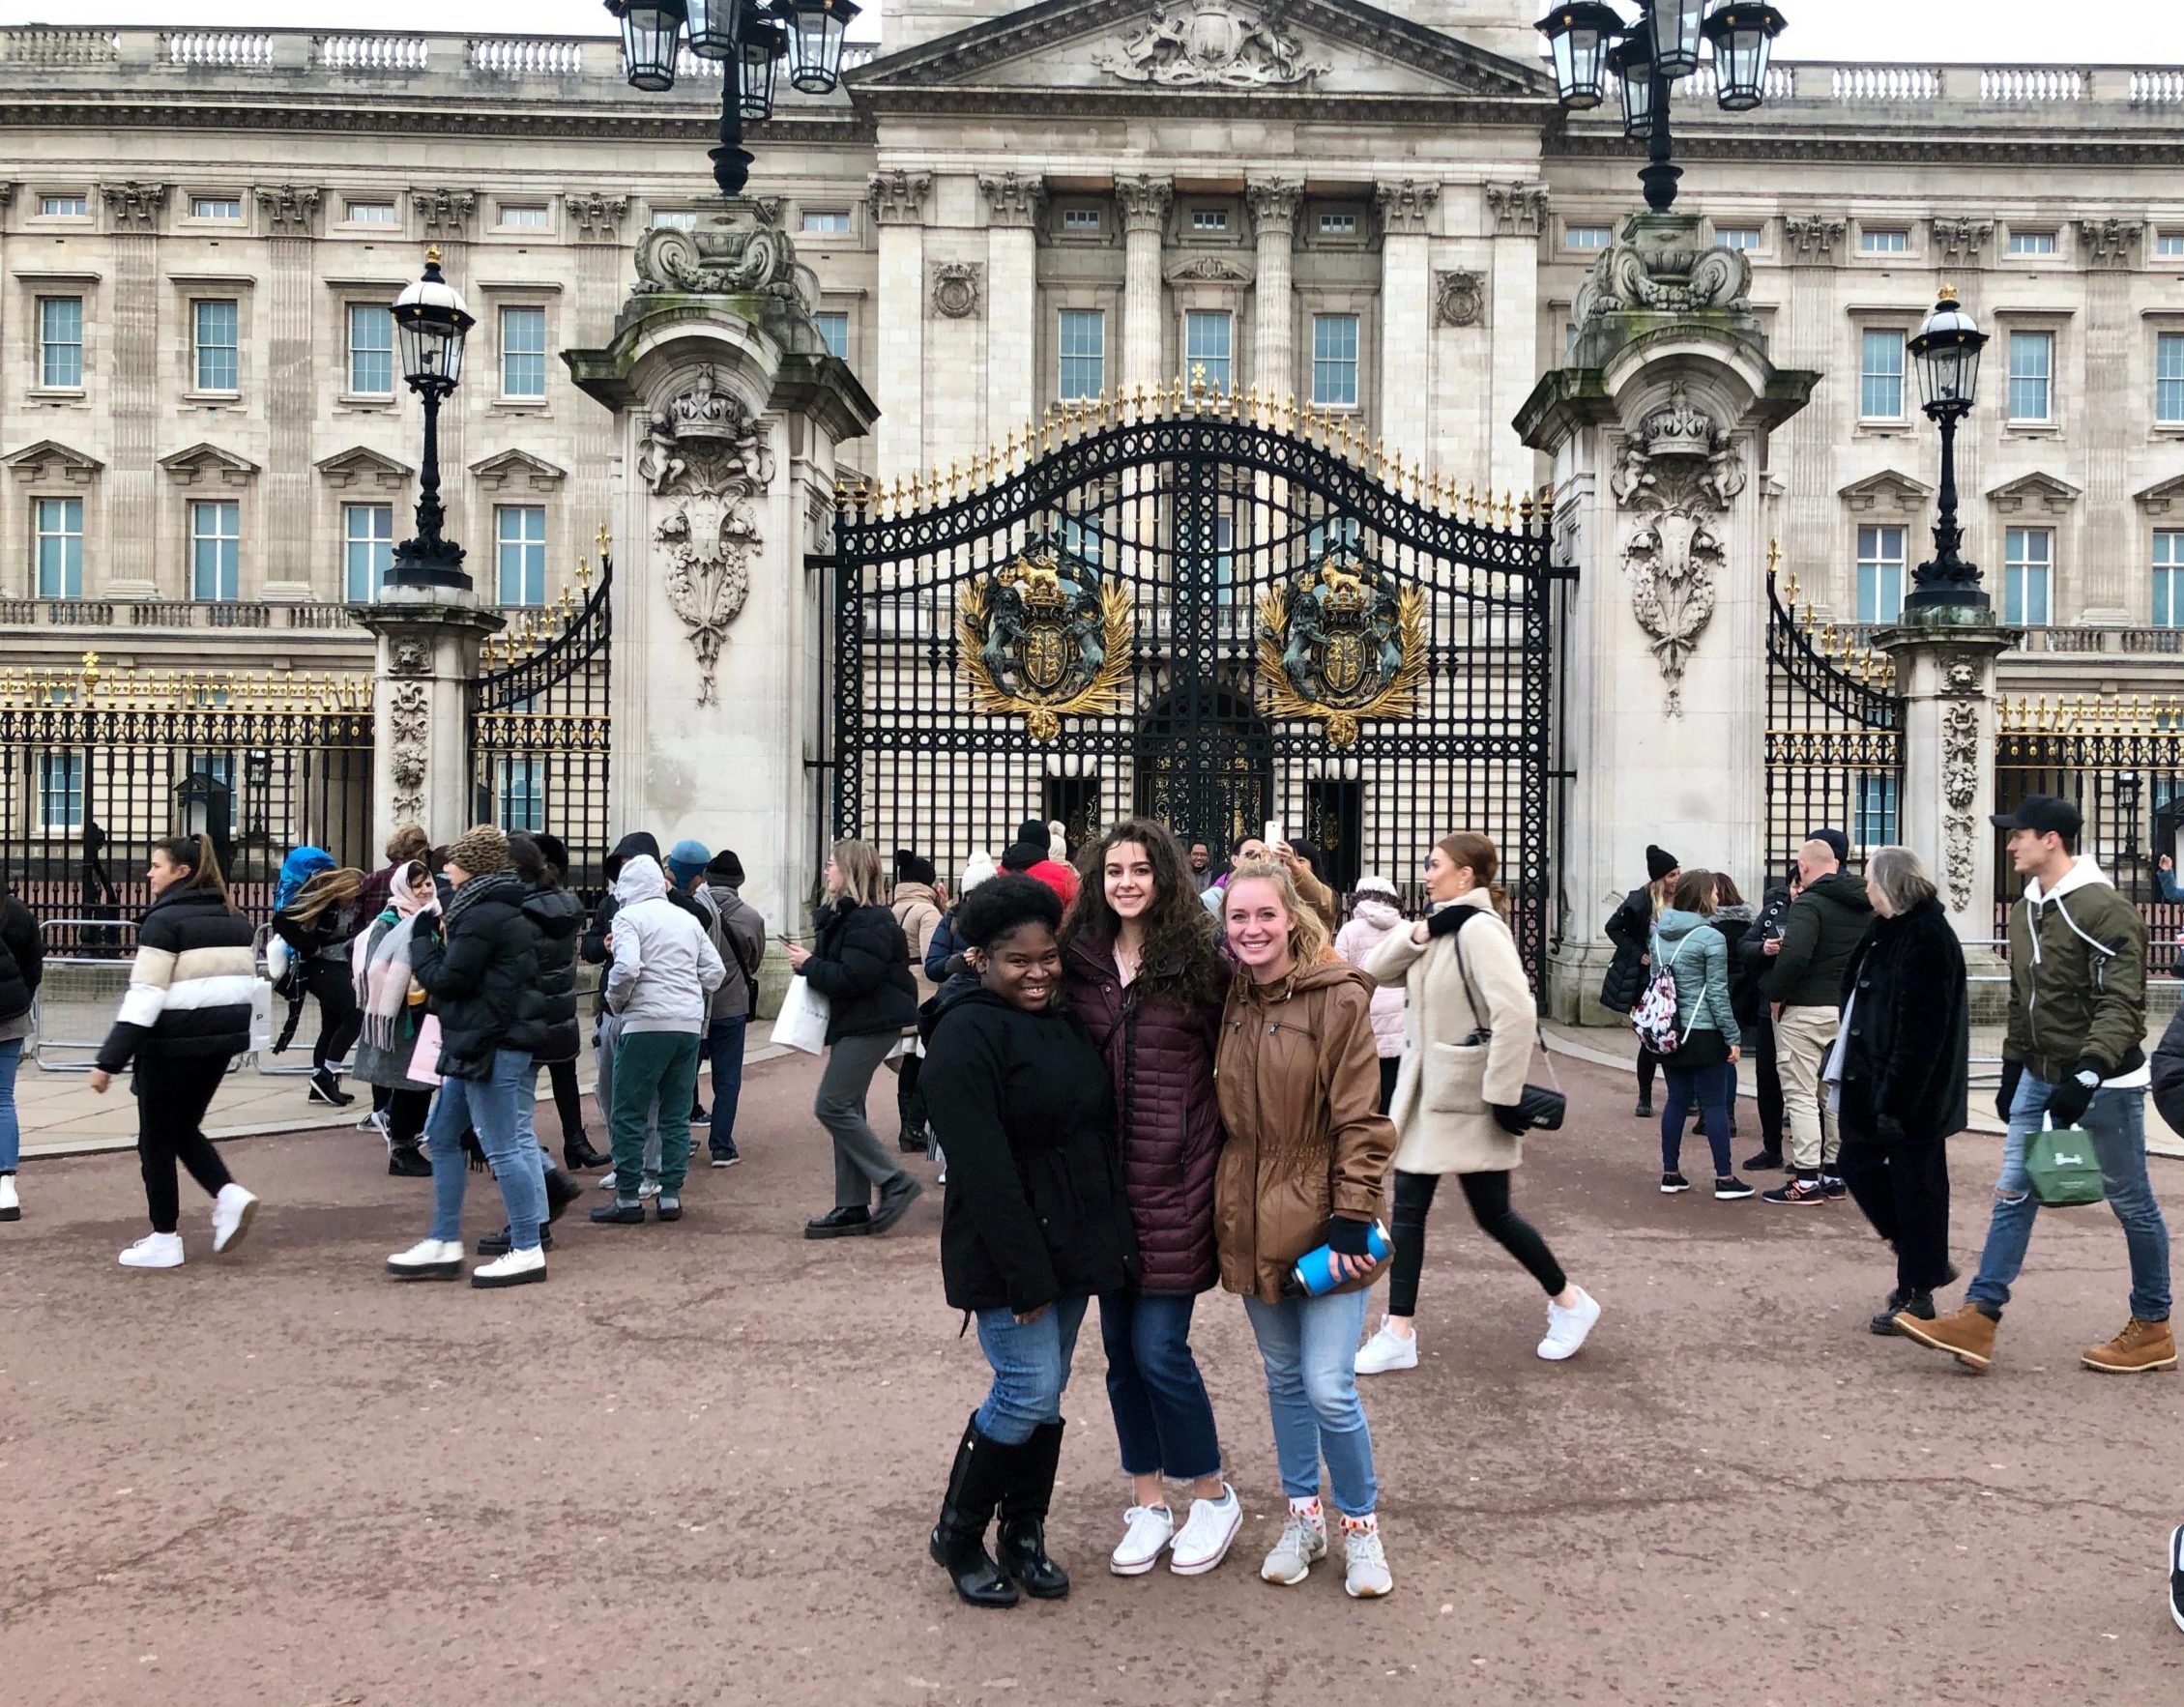 Students posing in front of Buckingham Palace, London, England